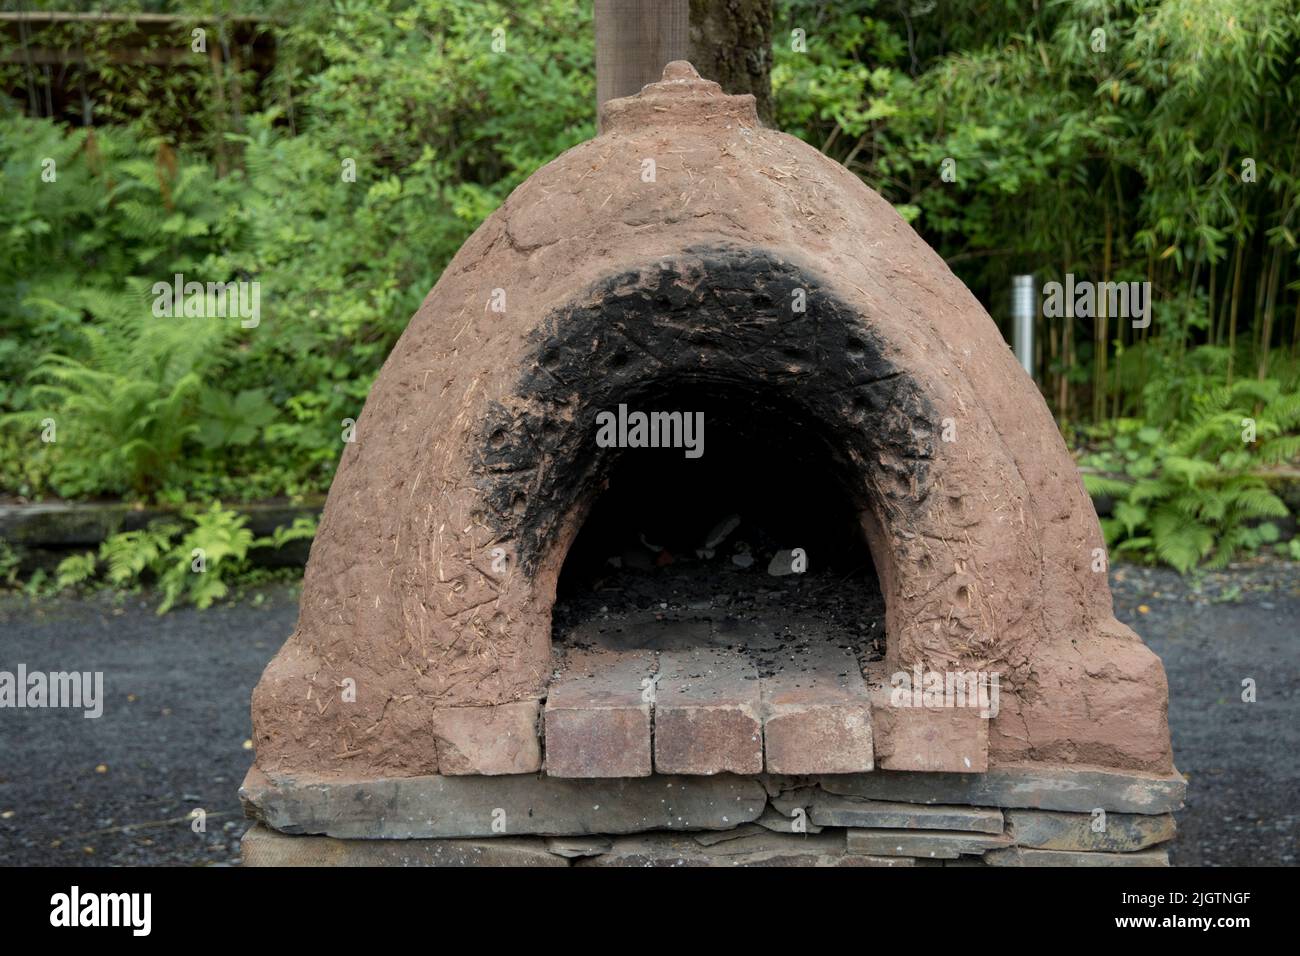 Home made Pizza oven Stock Photo